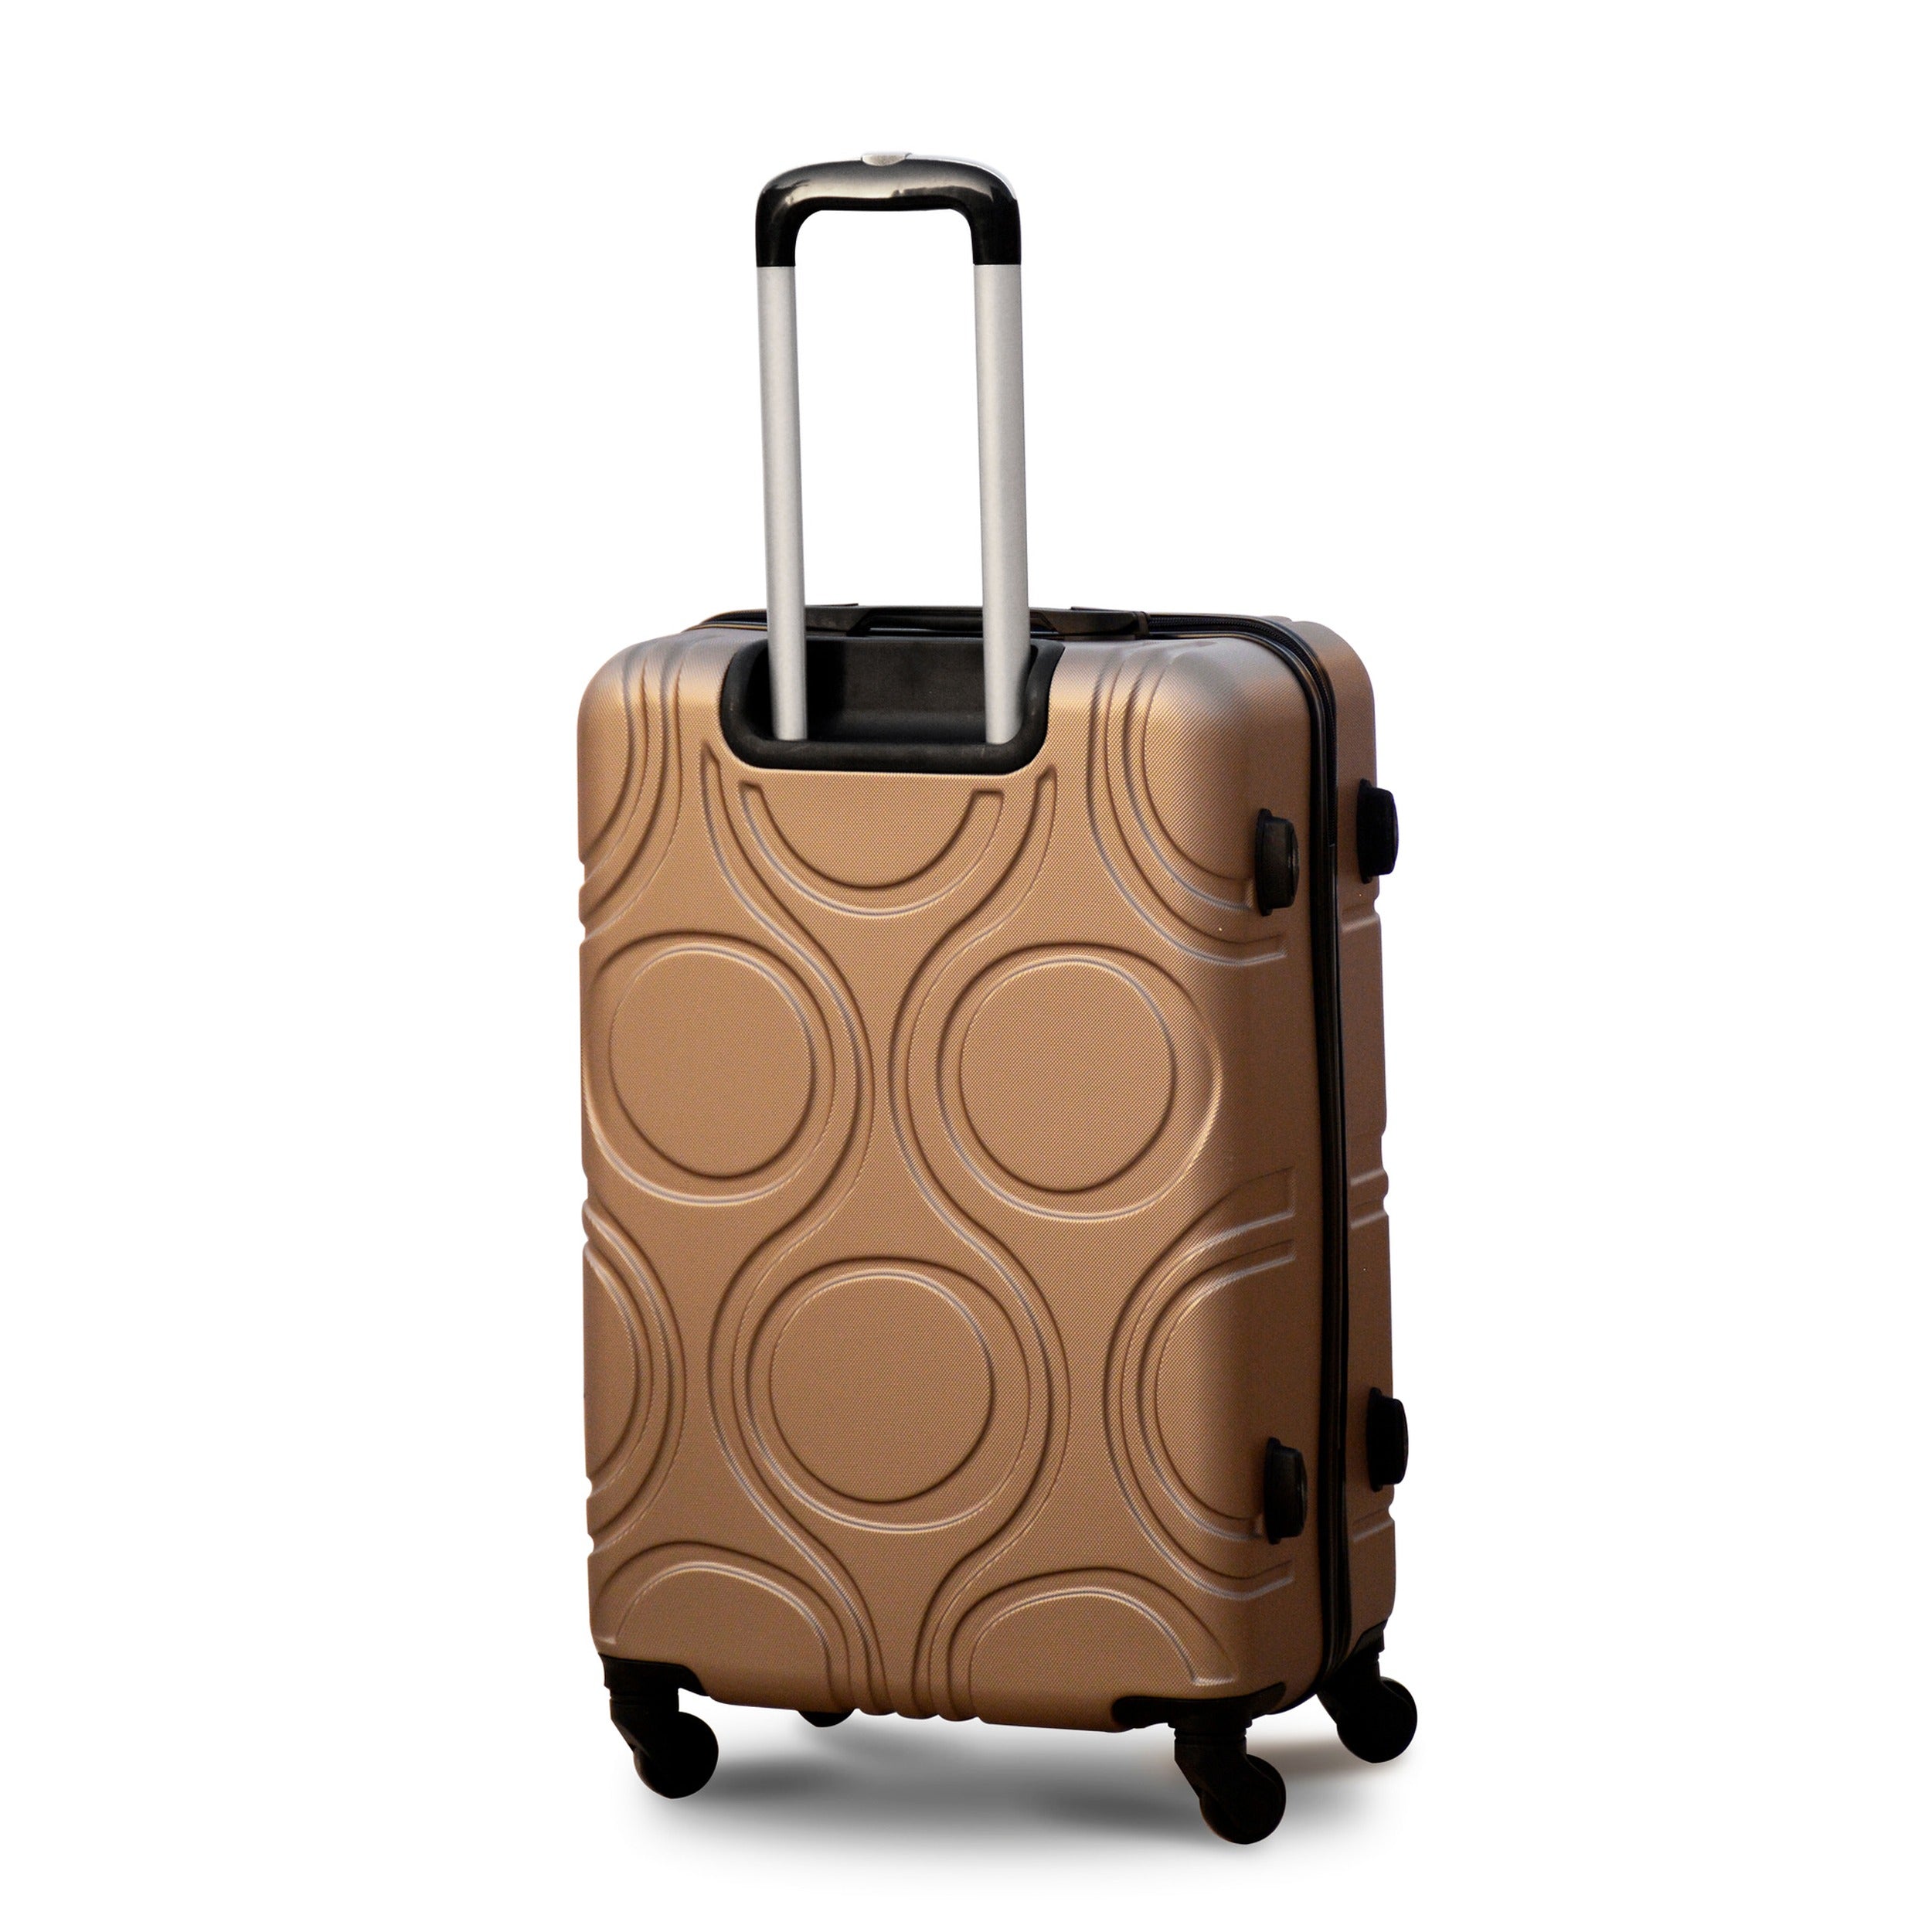 20” Inches Lightweight ABS Luggage | Hard Case Trolley Bag | 2 Years Warranty | Yinton 2208 Gold